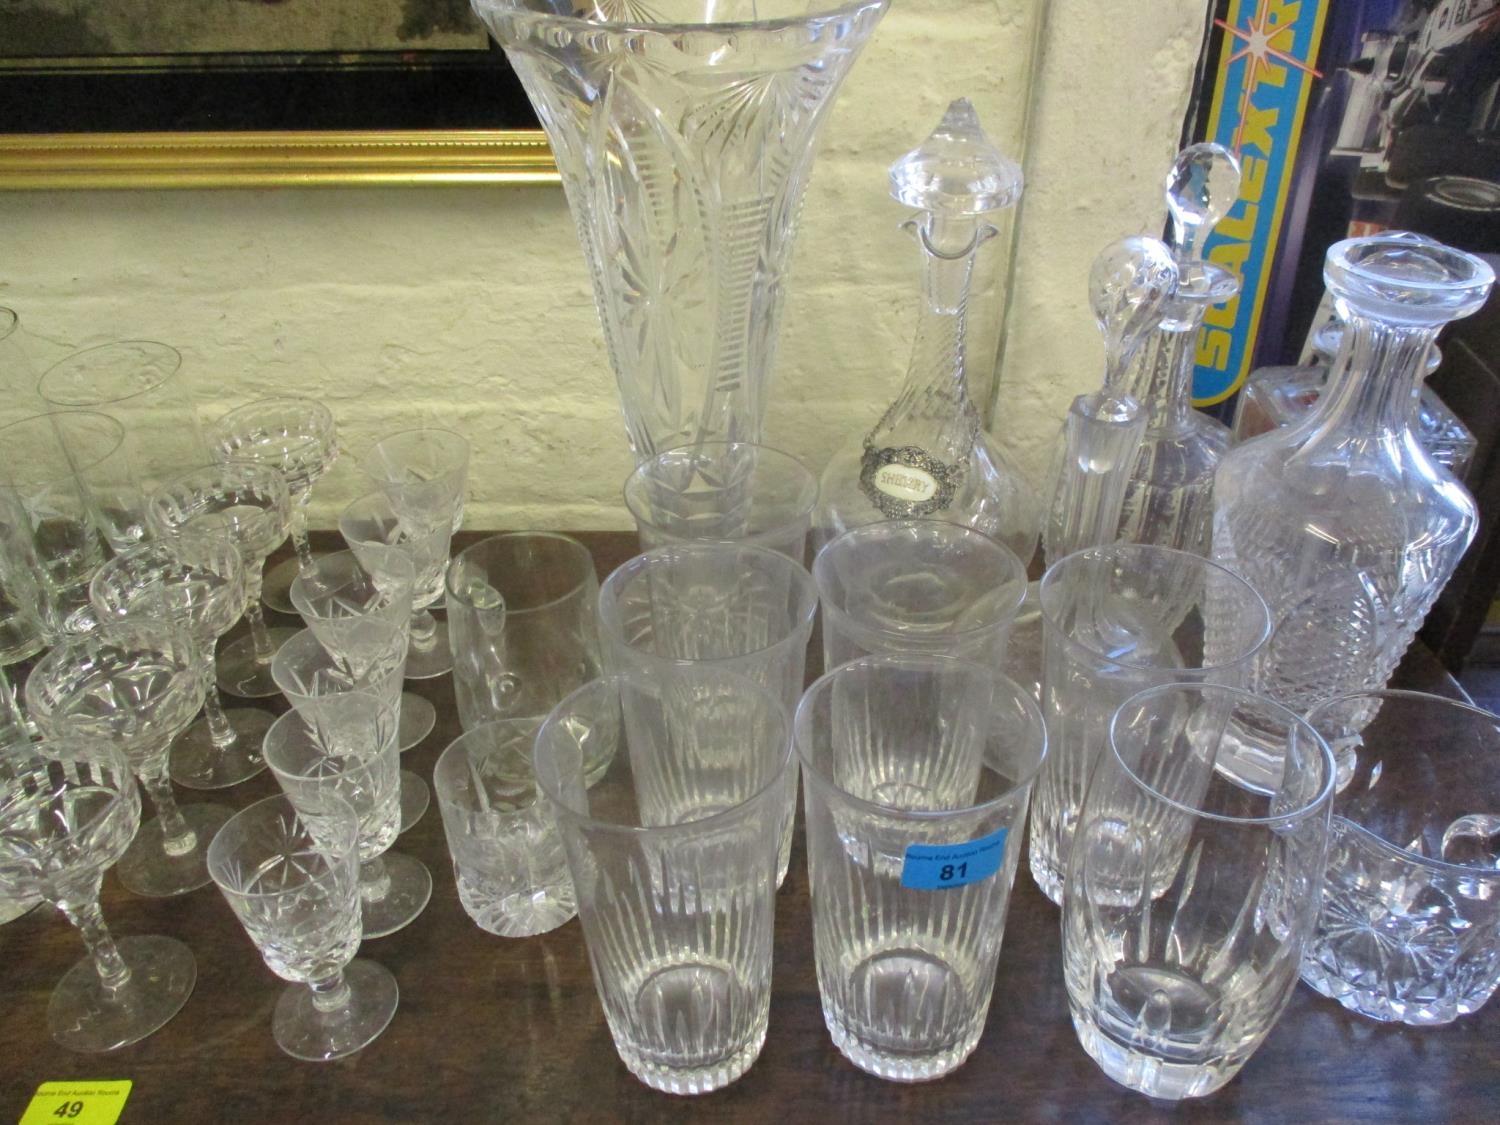 Mixed decanters with stoppers, a cut glass vase, water glasses and mixed 20th century glass to - Image 3 of 4